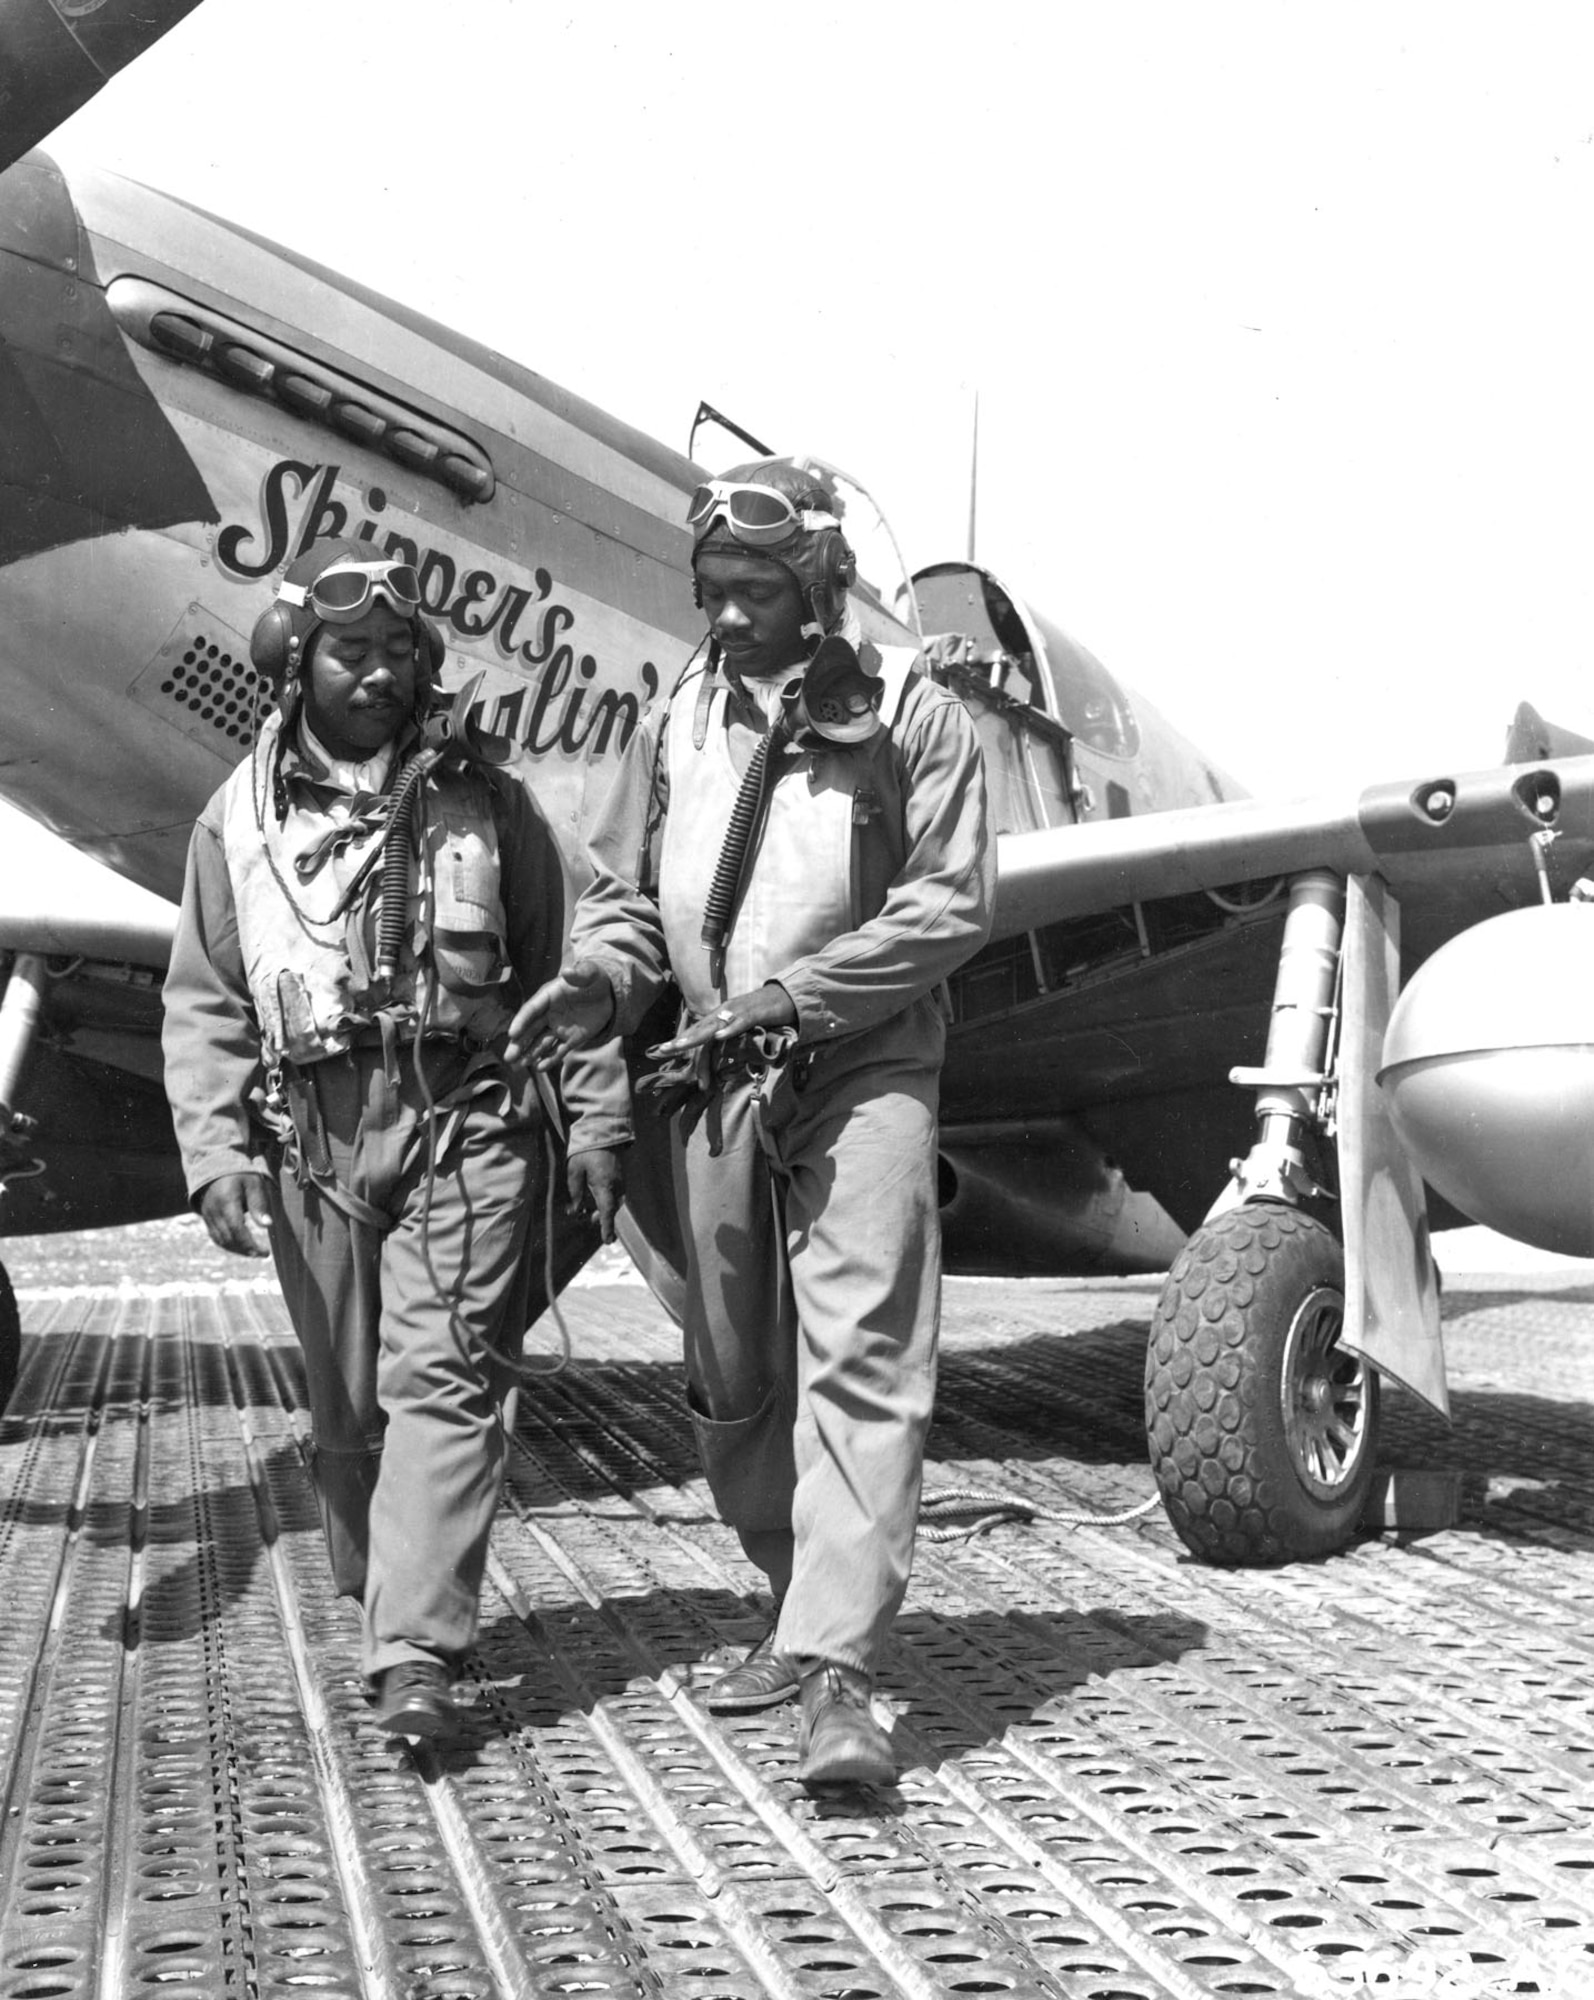 332nd Fighter Group pilots discuss combat flying. Their P-51 Mustangs, like the one here, were well-suited to long bomber escort missions. (U.S. Air Force photo)